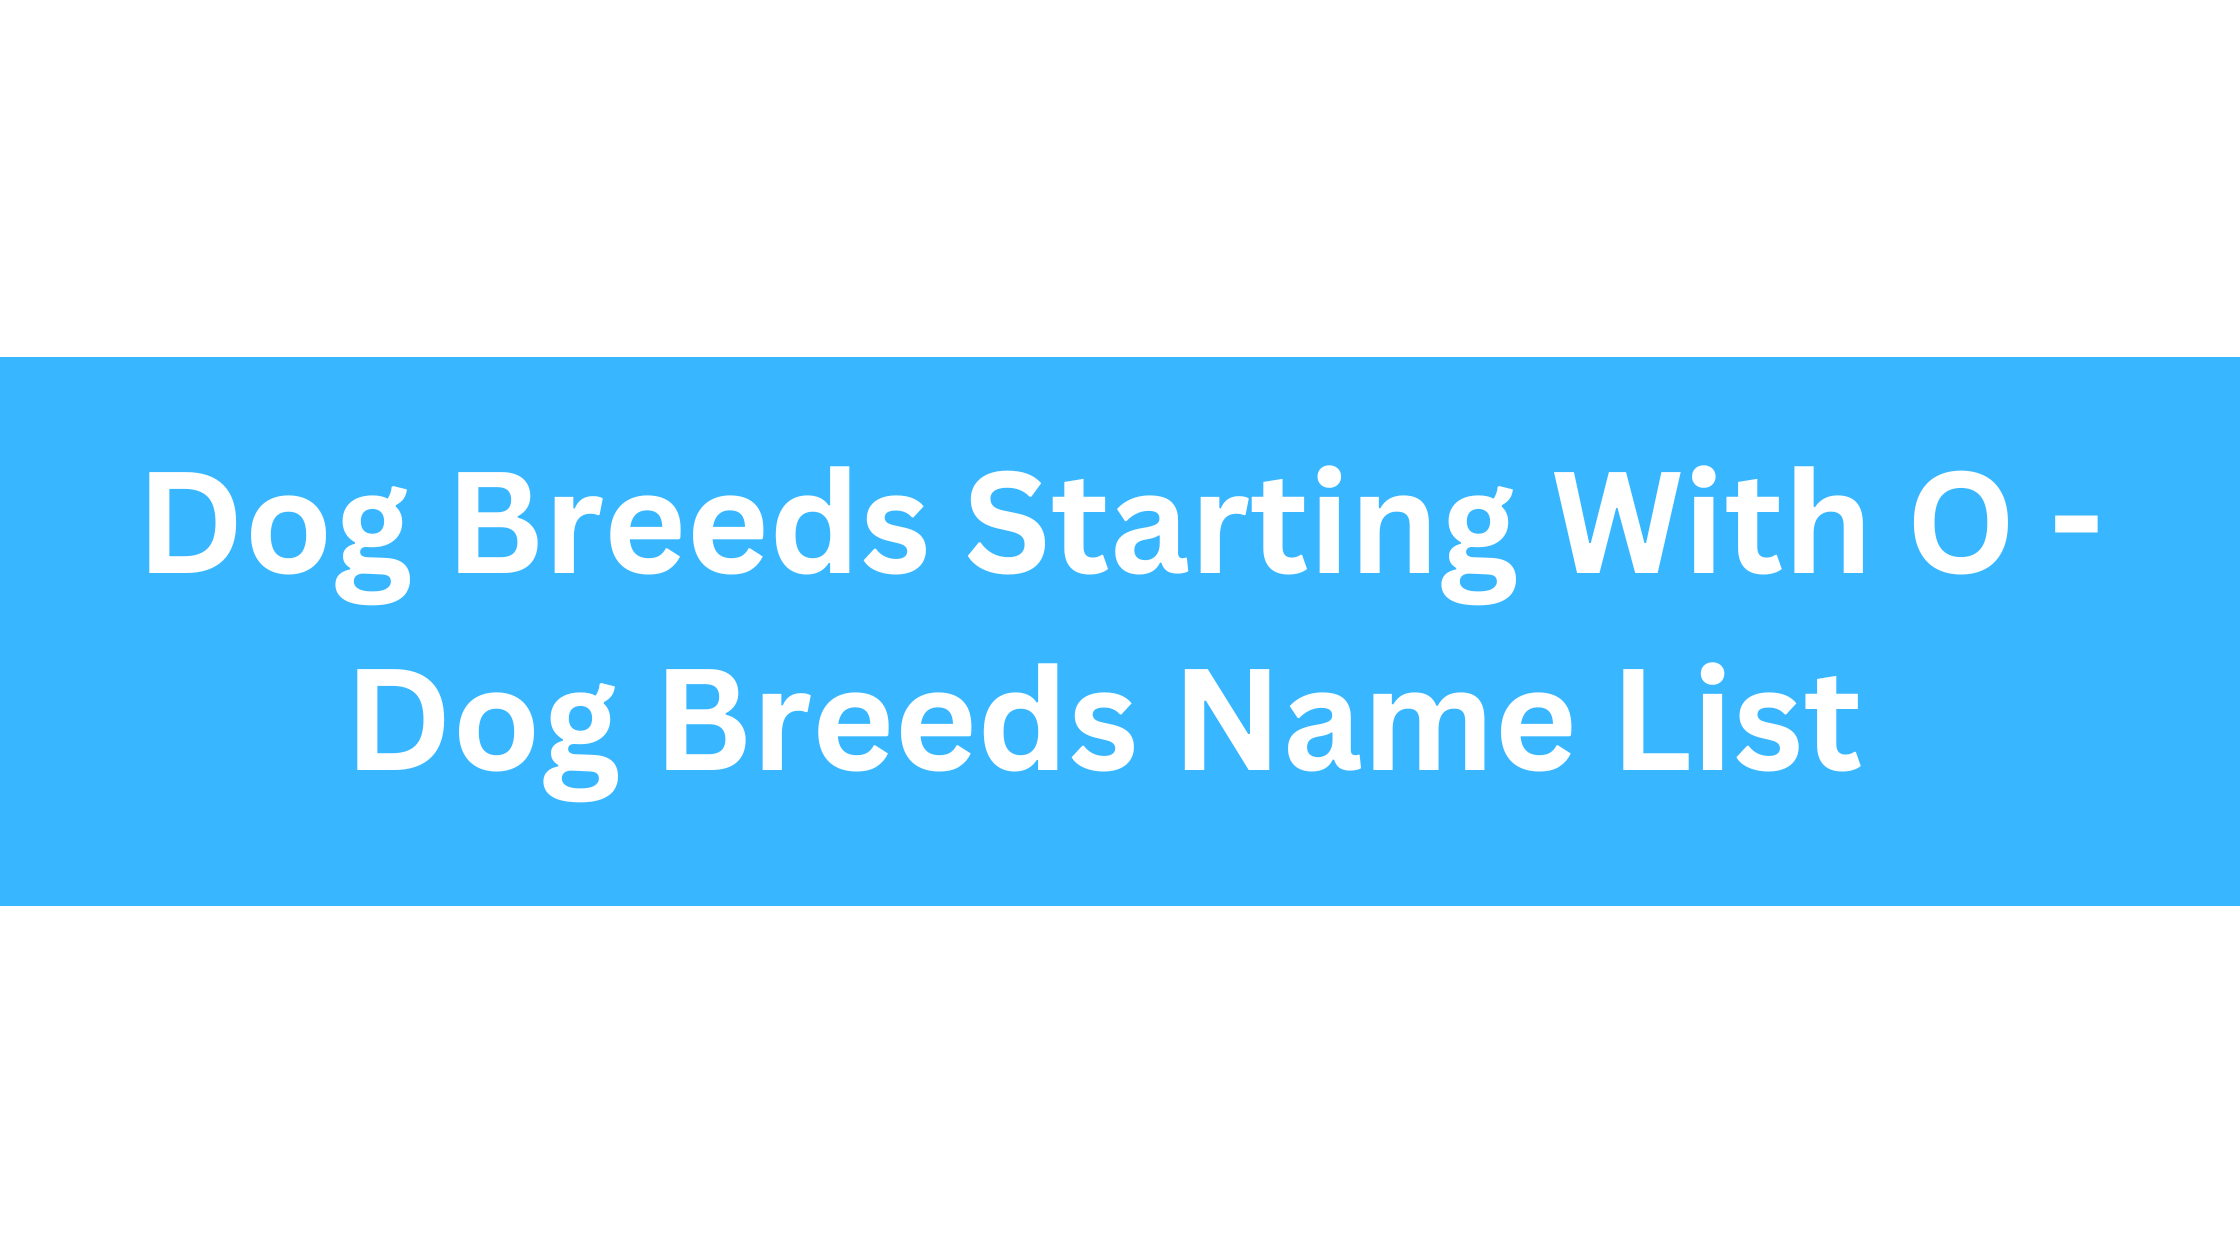 Dog Breeds Starting With O